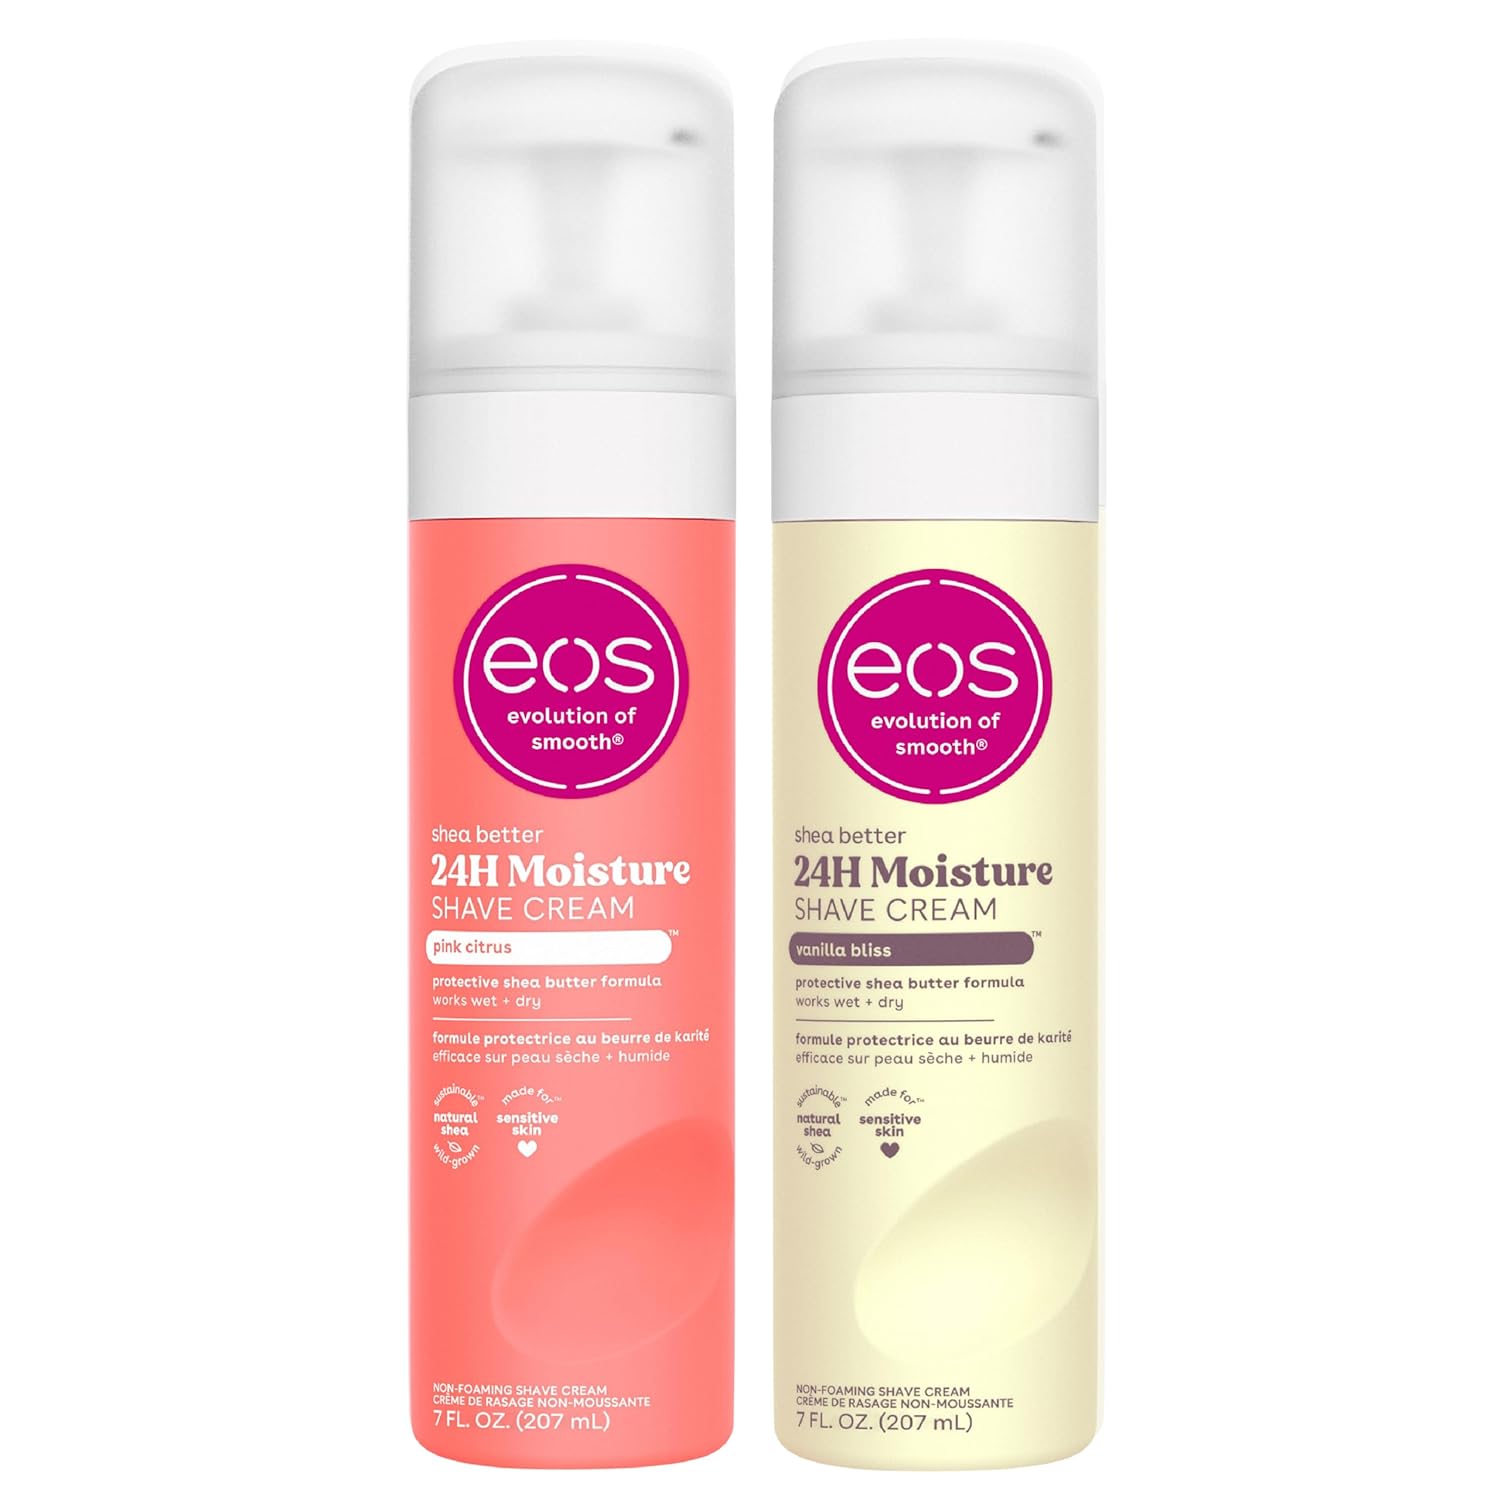 eos Shea Better Shave Cream- Vanilla Bliss & Pink Citrus, 24H Moisture, Skin Care Products, 7 fl oz, 2-Pack